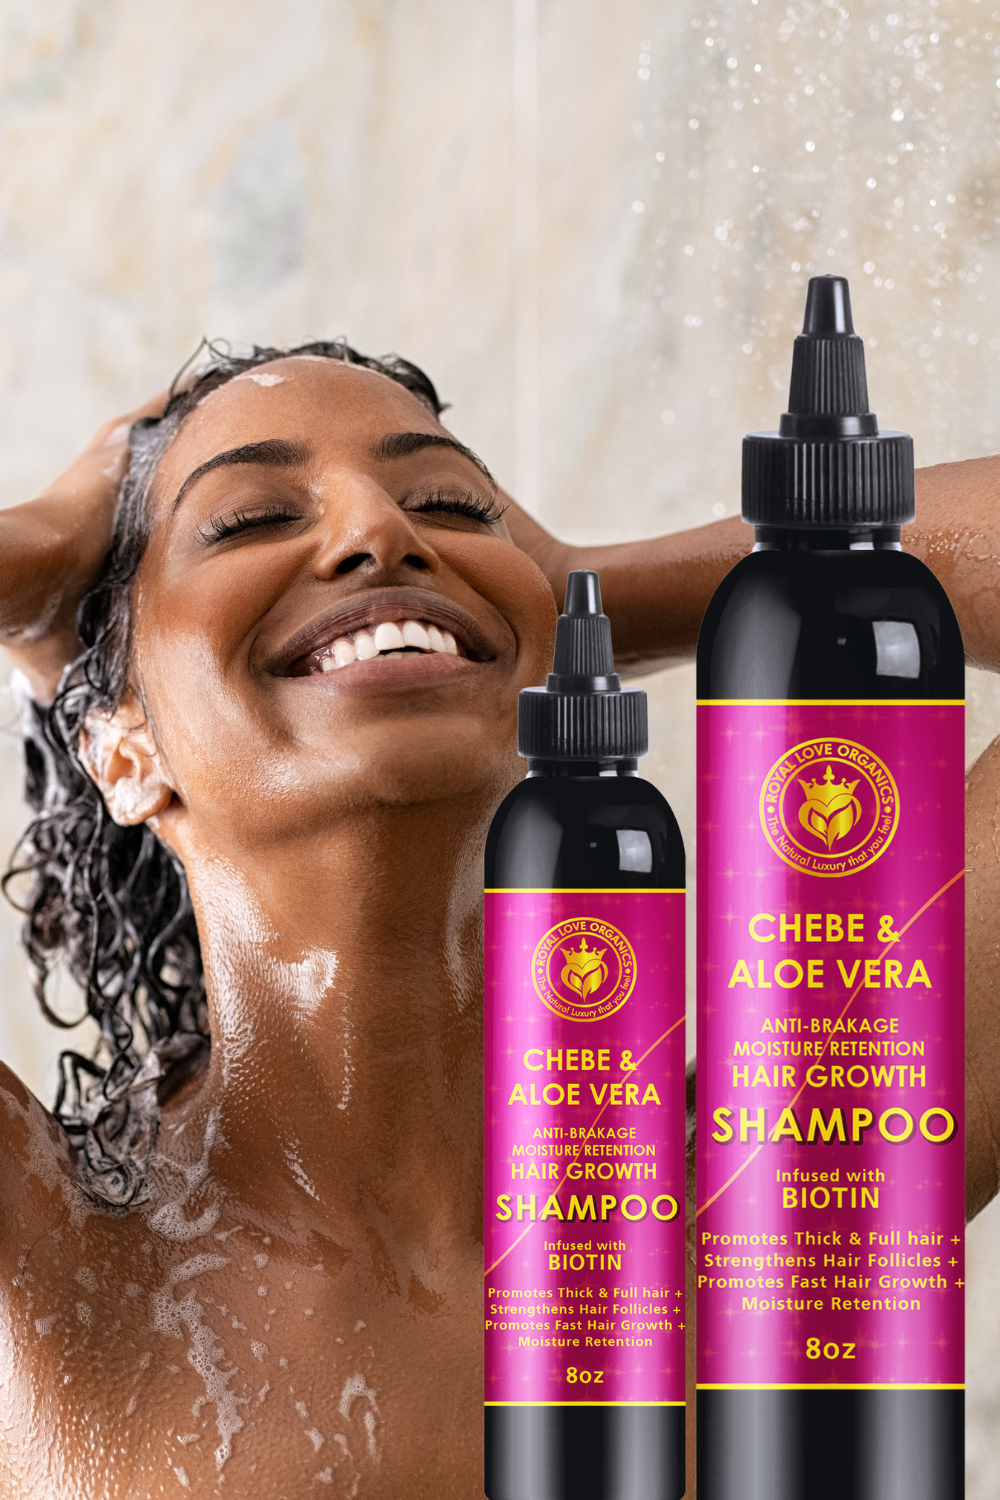 Chebe Hair Growth Shampoo & Conditioner Set